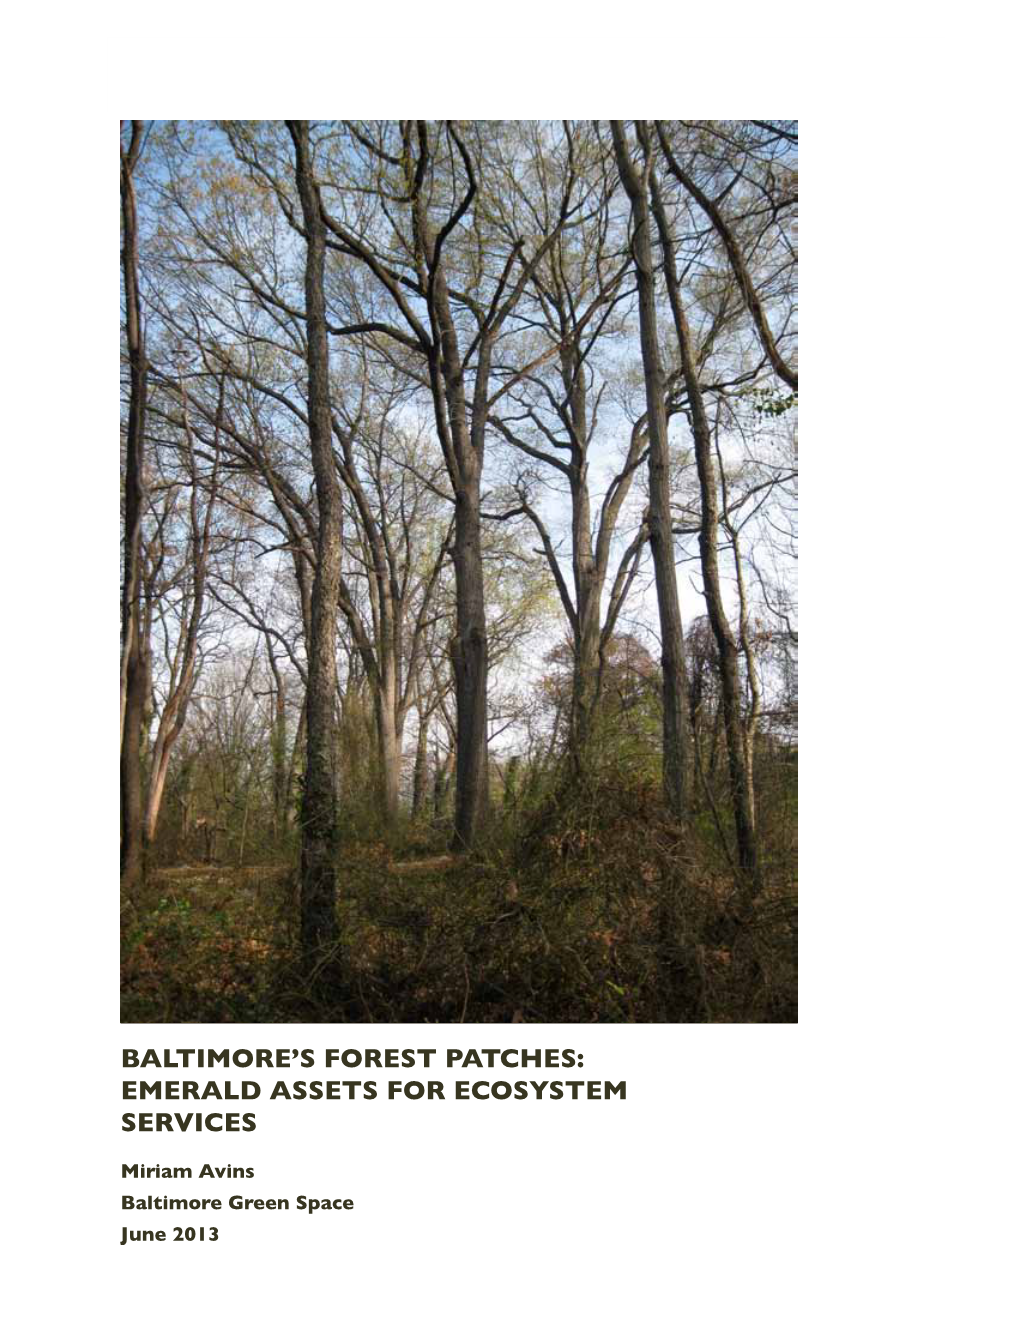 Baltimore's Forest Patches: Emerald Assets for Ecosystem Services